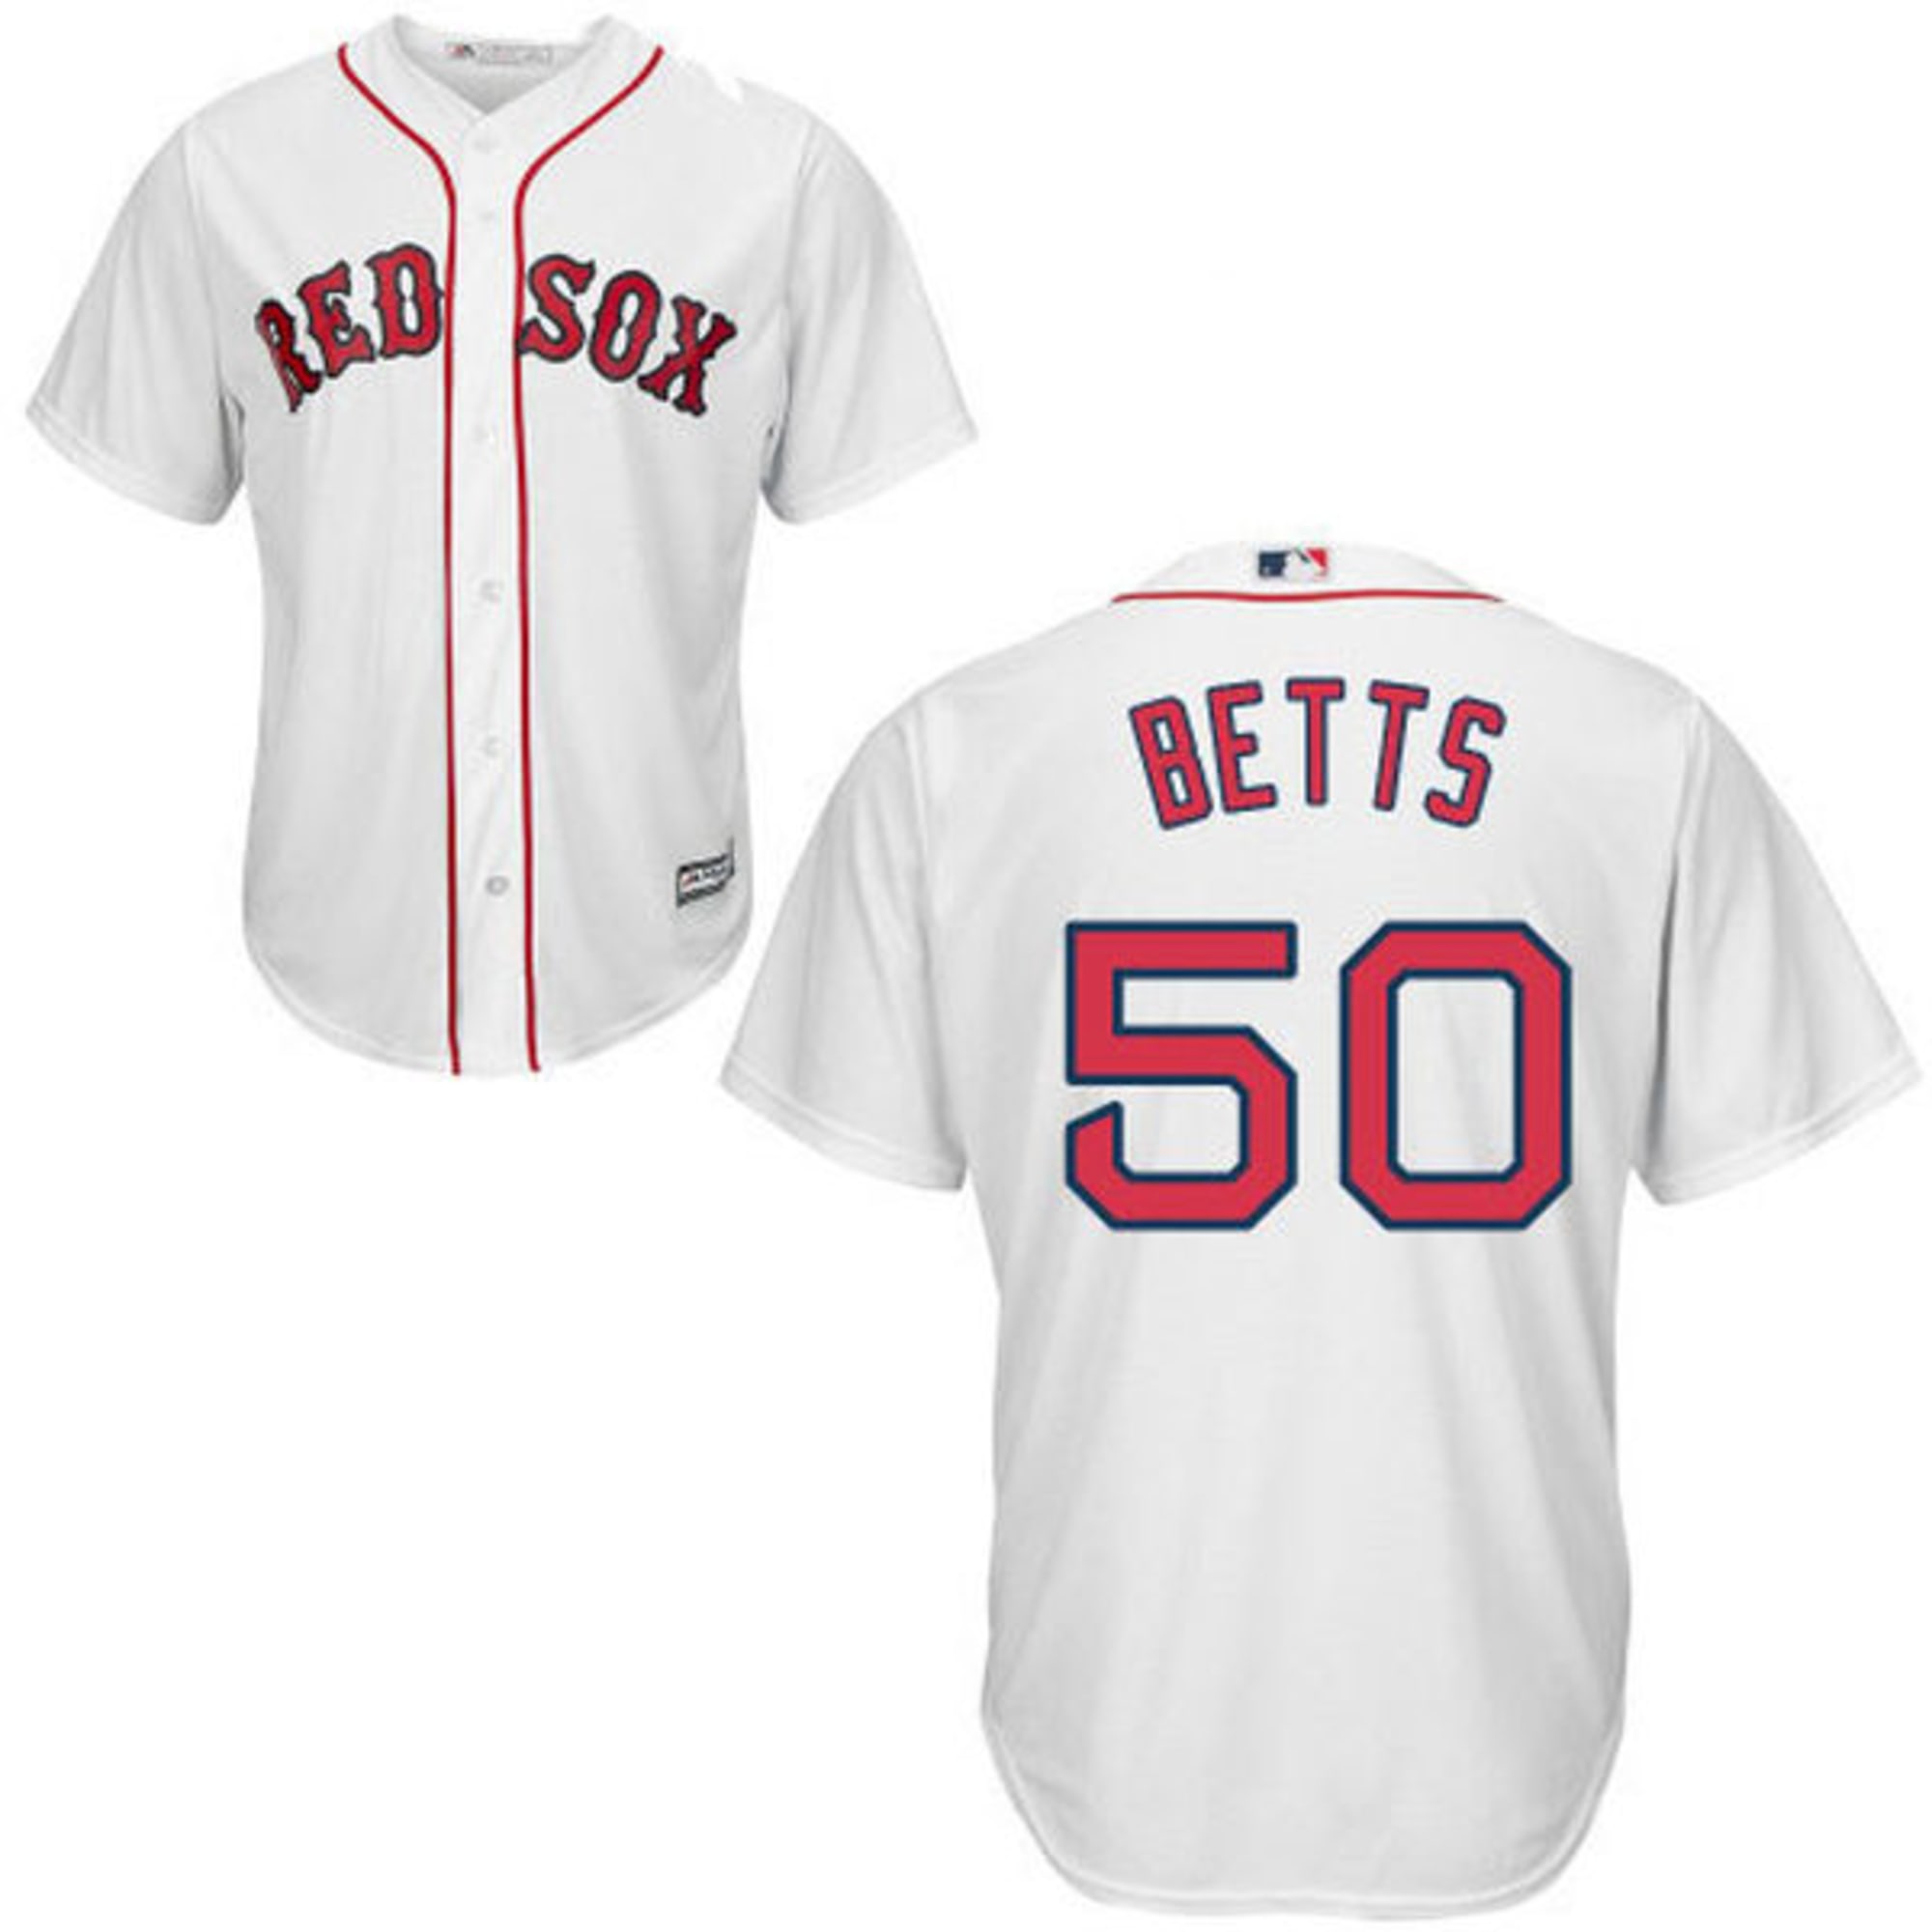 red sox st patrick's day jersey 2018